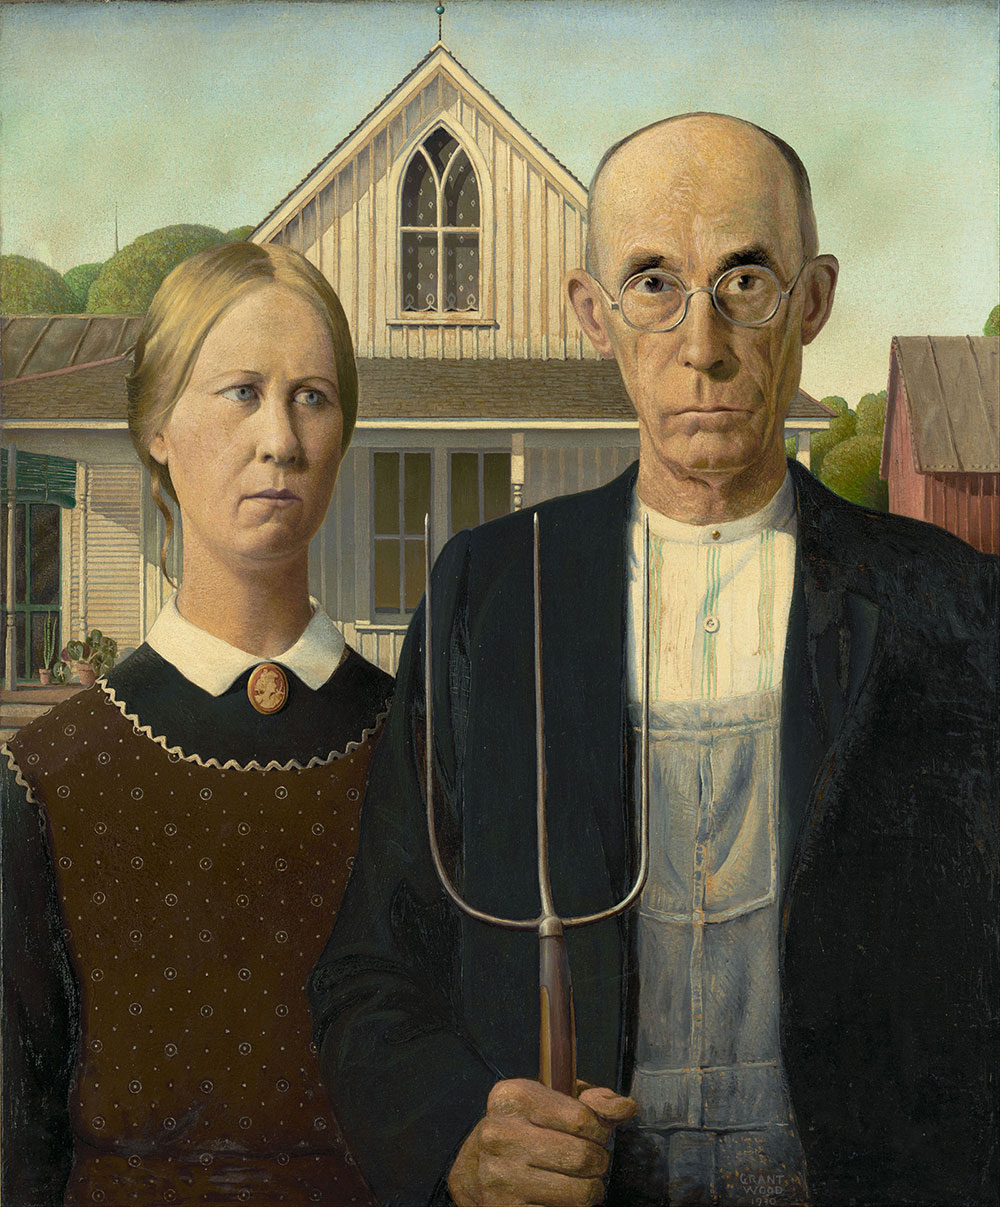 🎨 I’m Pretty Sure You Can’t Match at Least 14/20 of These Famous Paintings to the Artist American Gothic Painting By Grant Wood